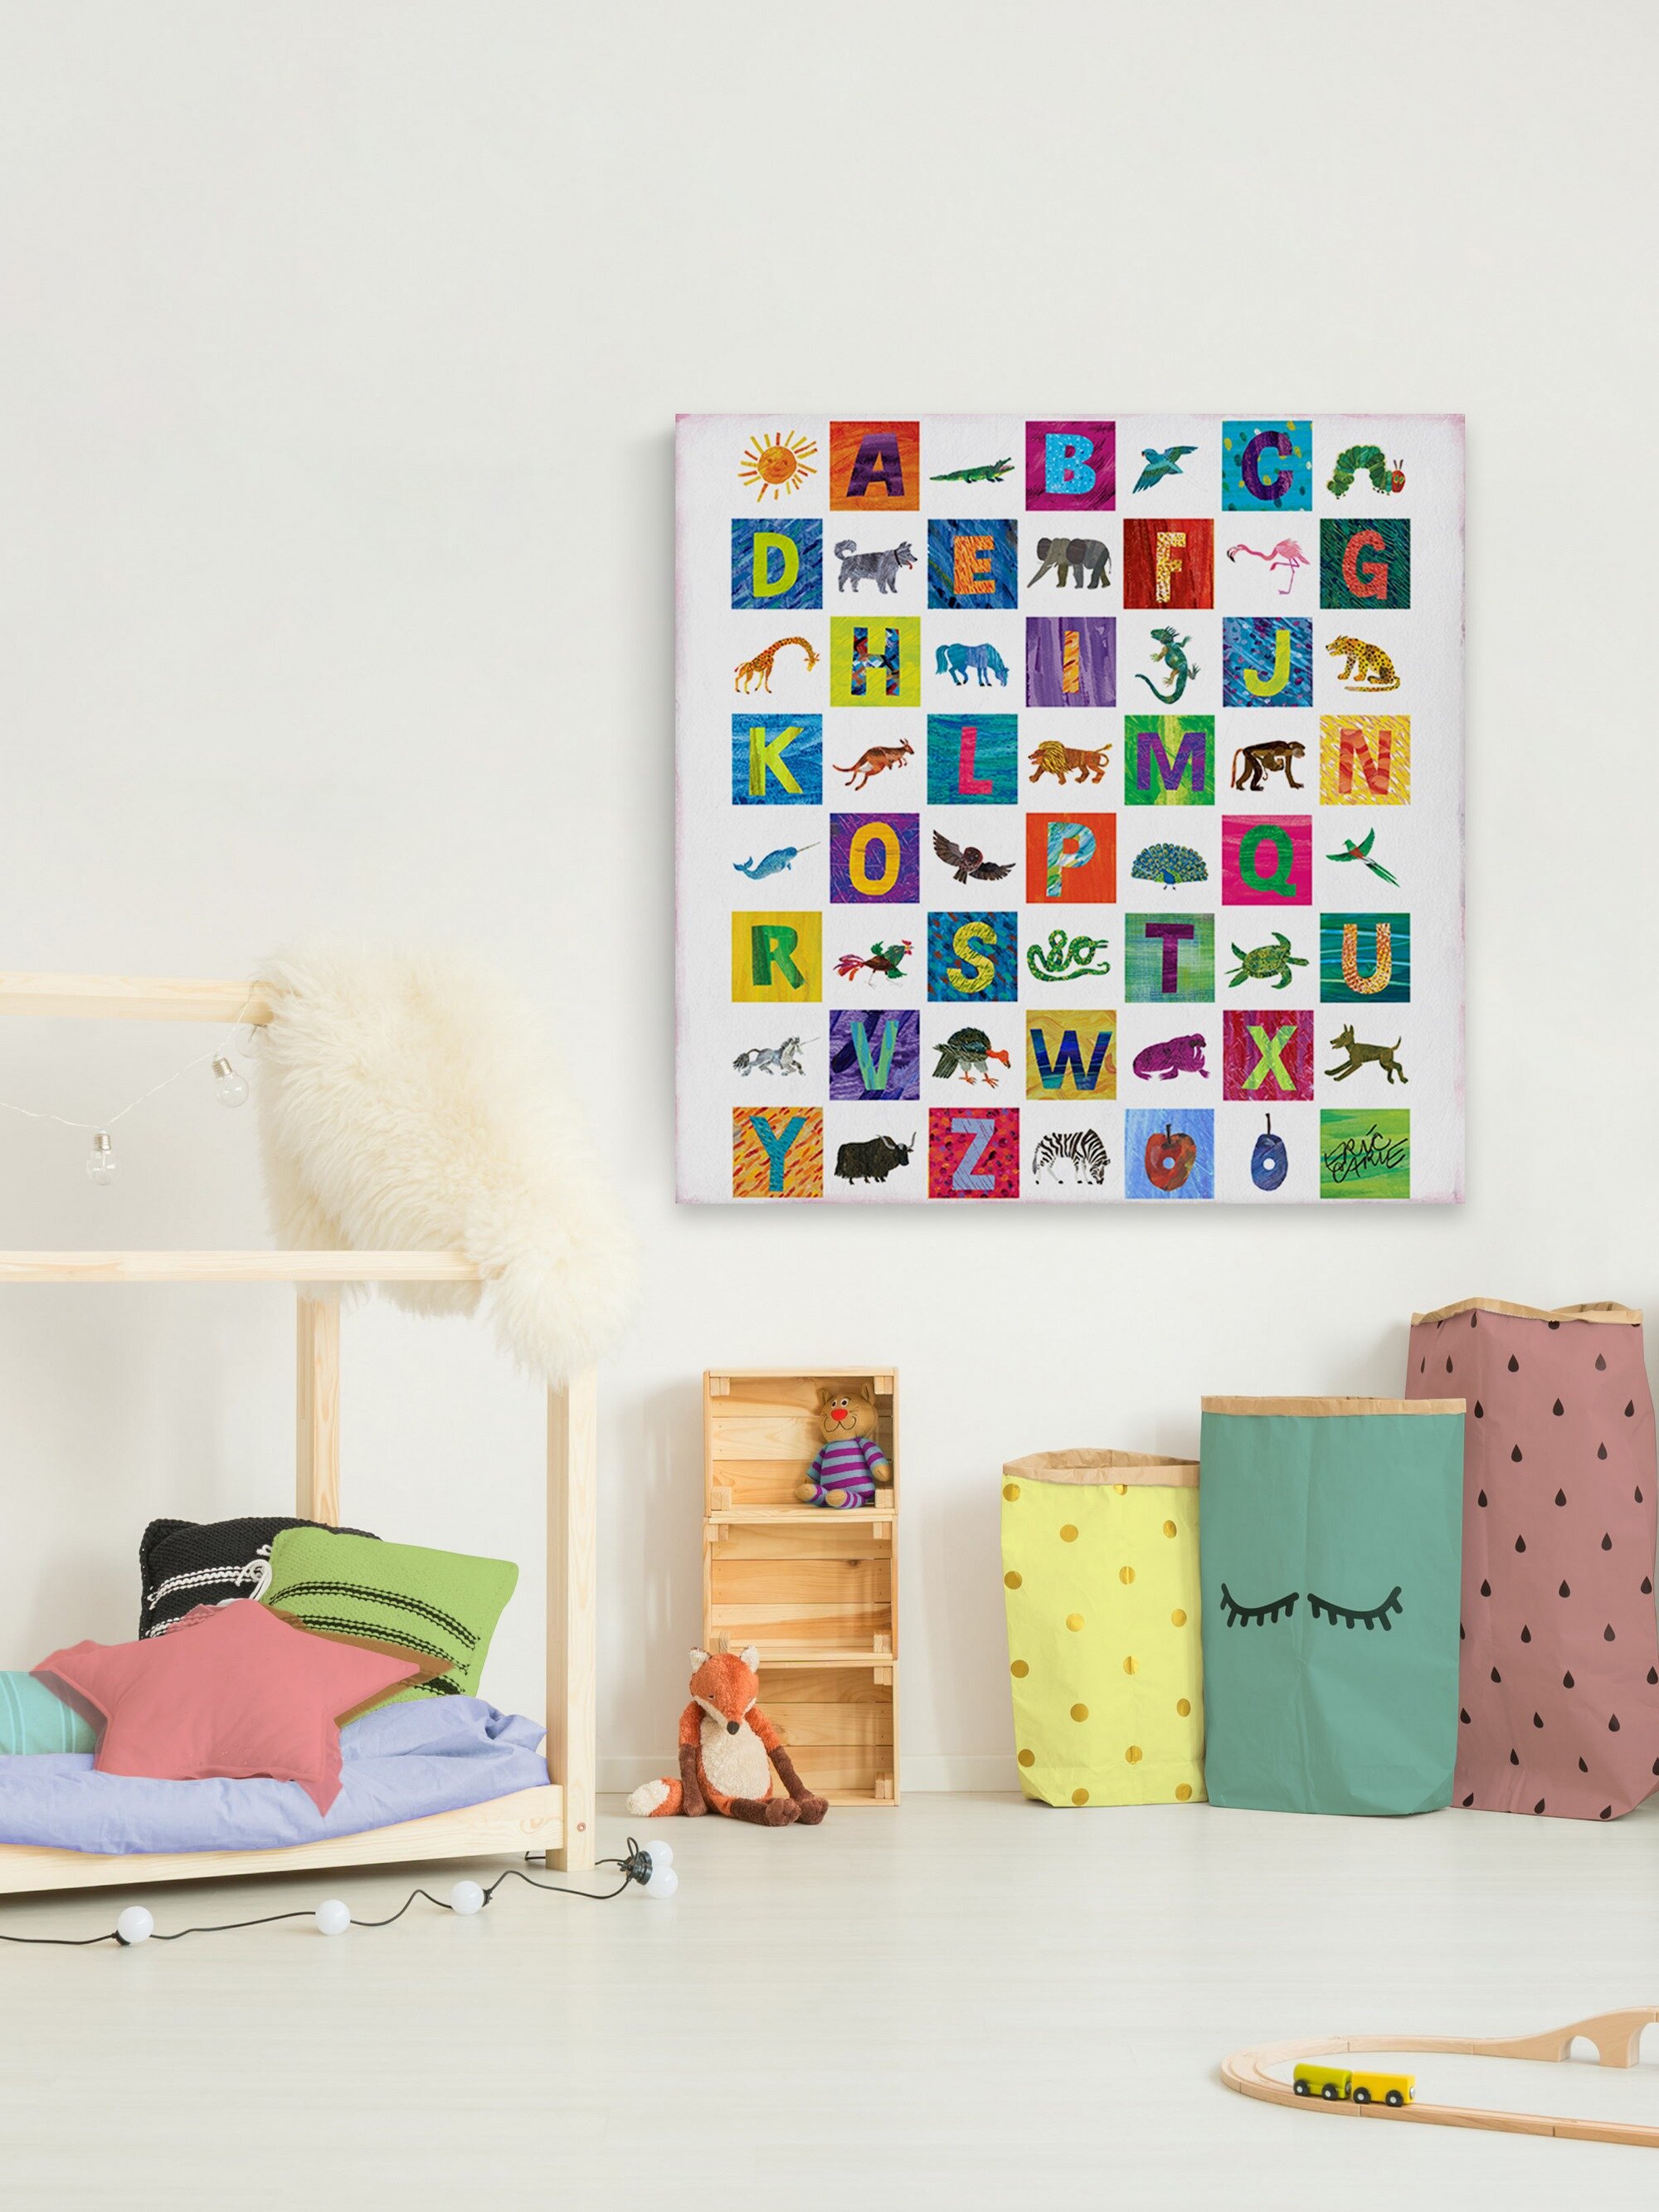 Kids Alphabet Letters with Pictures on Large Canvas Wall Art Zoo Animal ABC Kids Baby Toddlers Preschool Learning Educational Posters